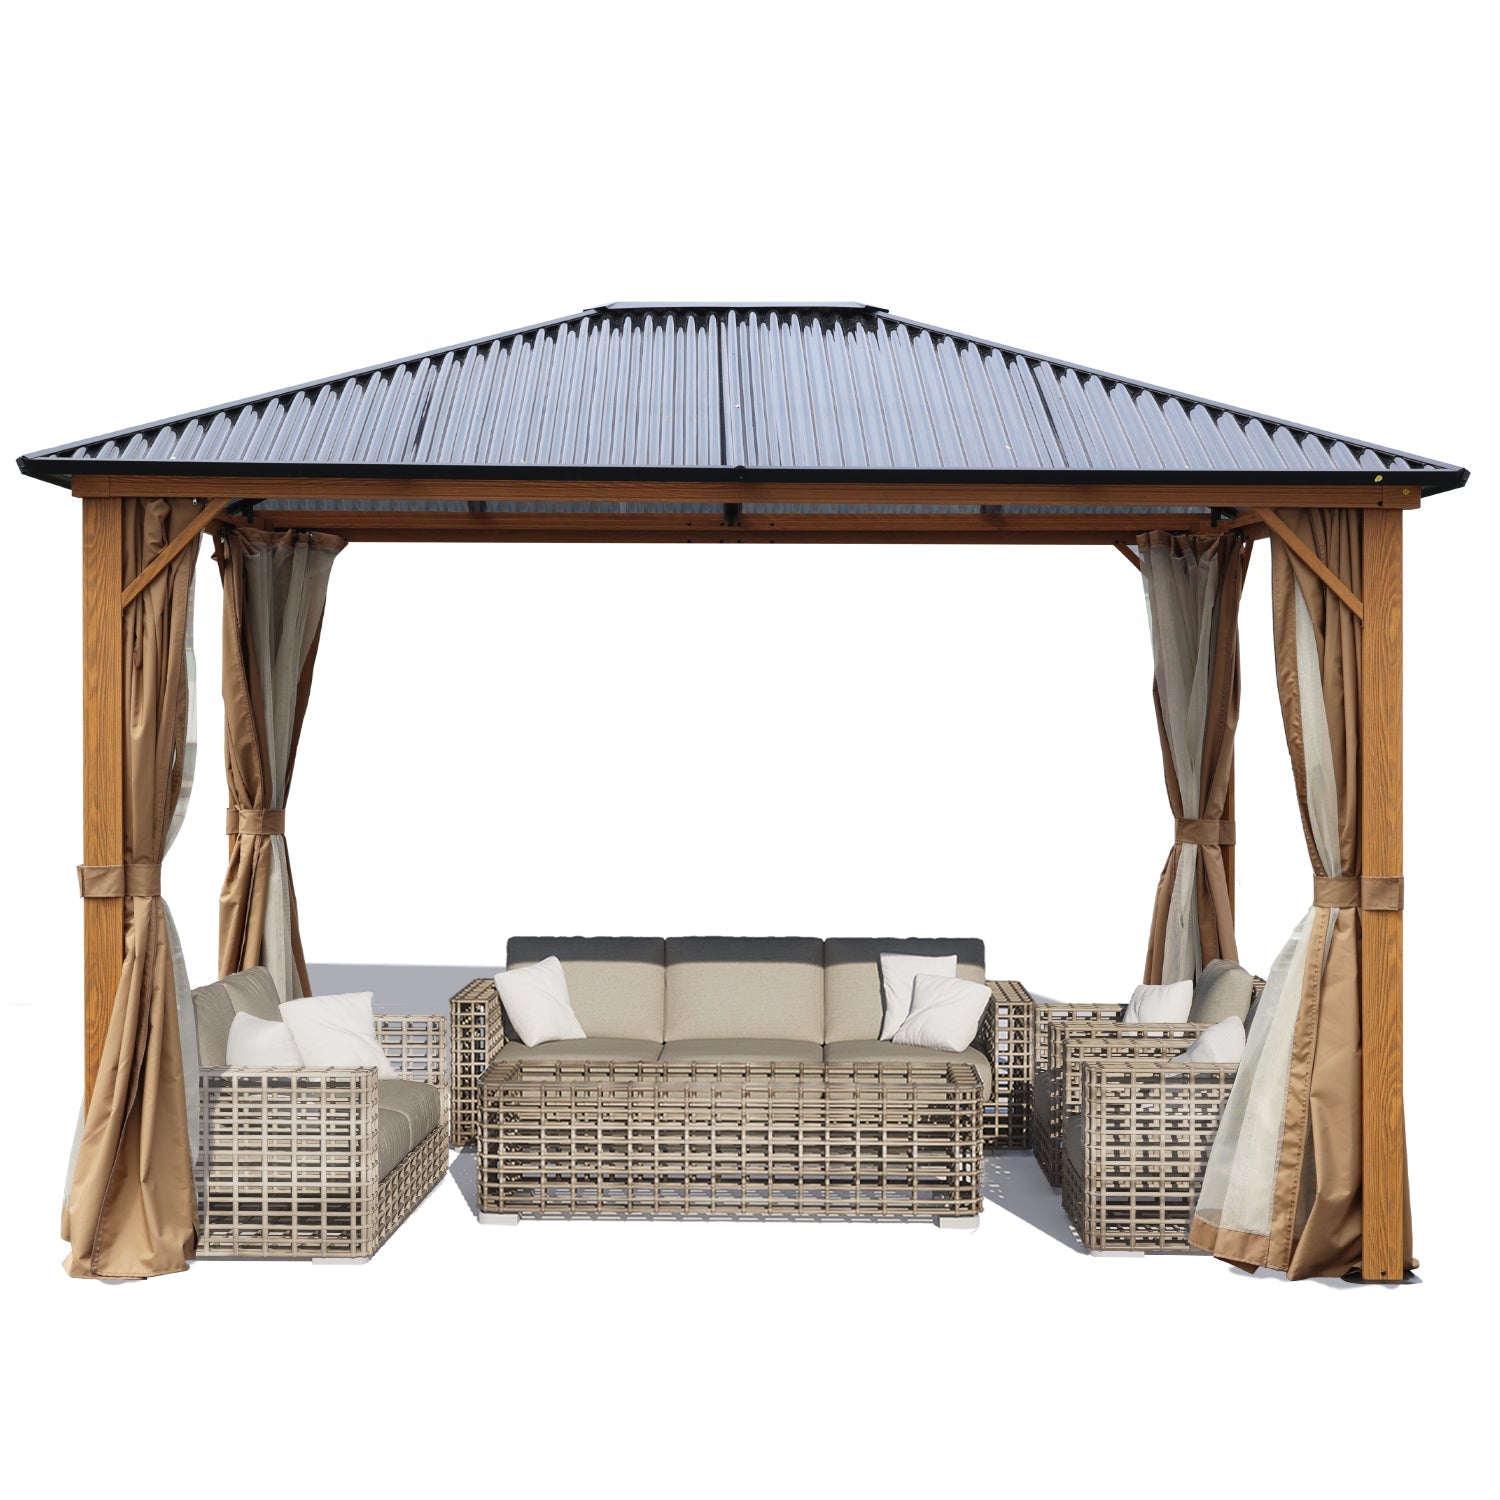 10 x 10 ft. /12 x 10 ft. Wooden Finish Coated Aluminum Frame Gazebo with Polycarbonate Roof, Curtains and Nettings Gazebo Aoodor LLC 10'x 12'  